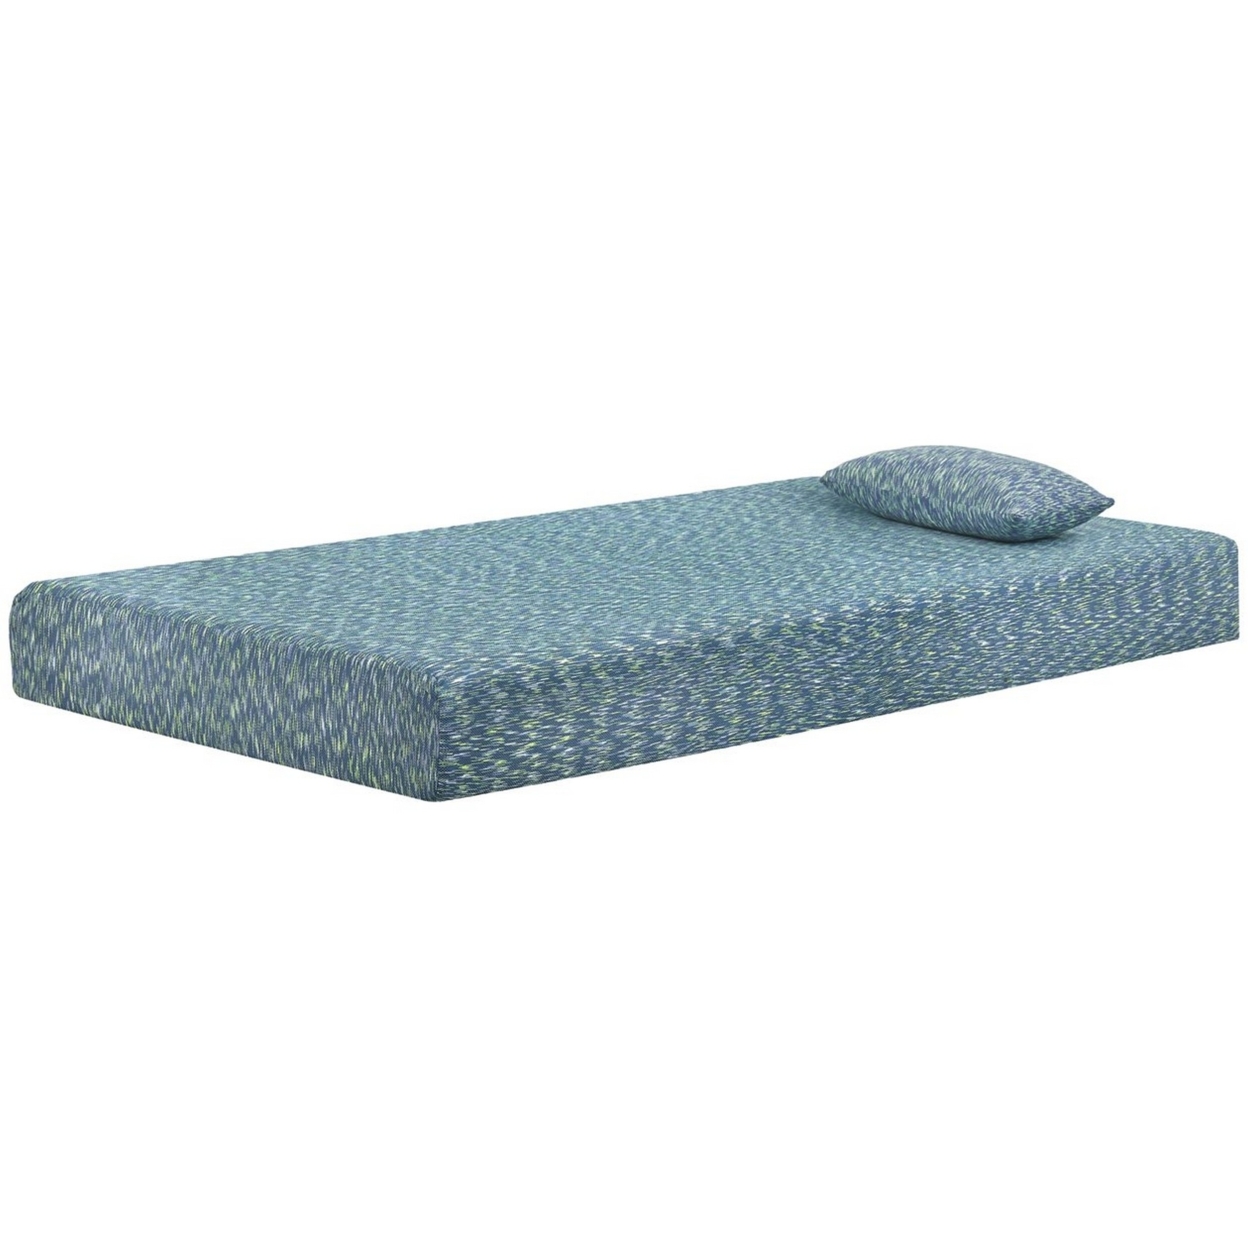 Full Size Mattress With Hyperstretch Knit Cover And Pillow, Blue- Saltoro Sherpi